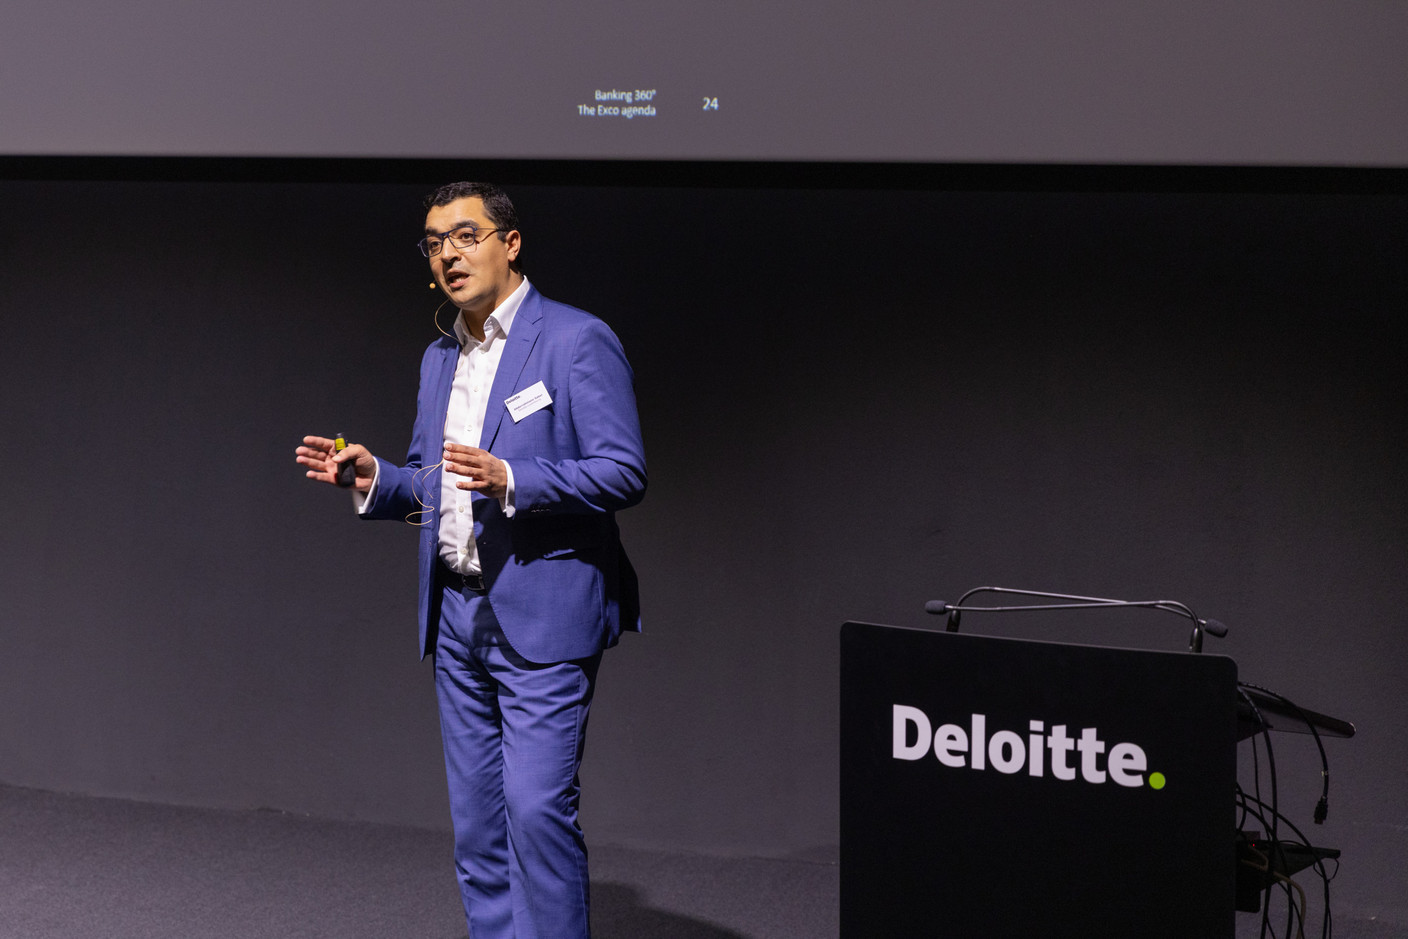 Abderrahmane Saber, director, spoke about running businesses efficiently at Deloitte Luxembourg's Banking 360 conference on 24 January 2023. Romain Gamba/Maison Moderne